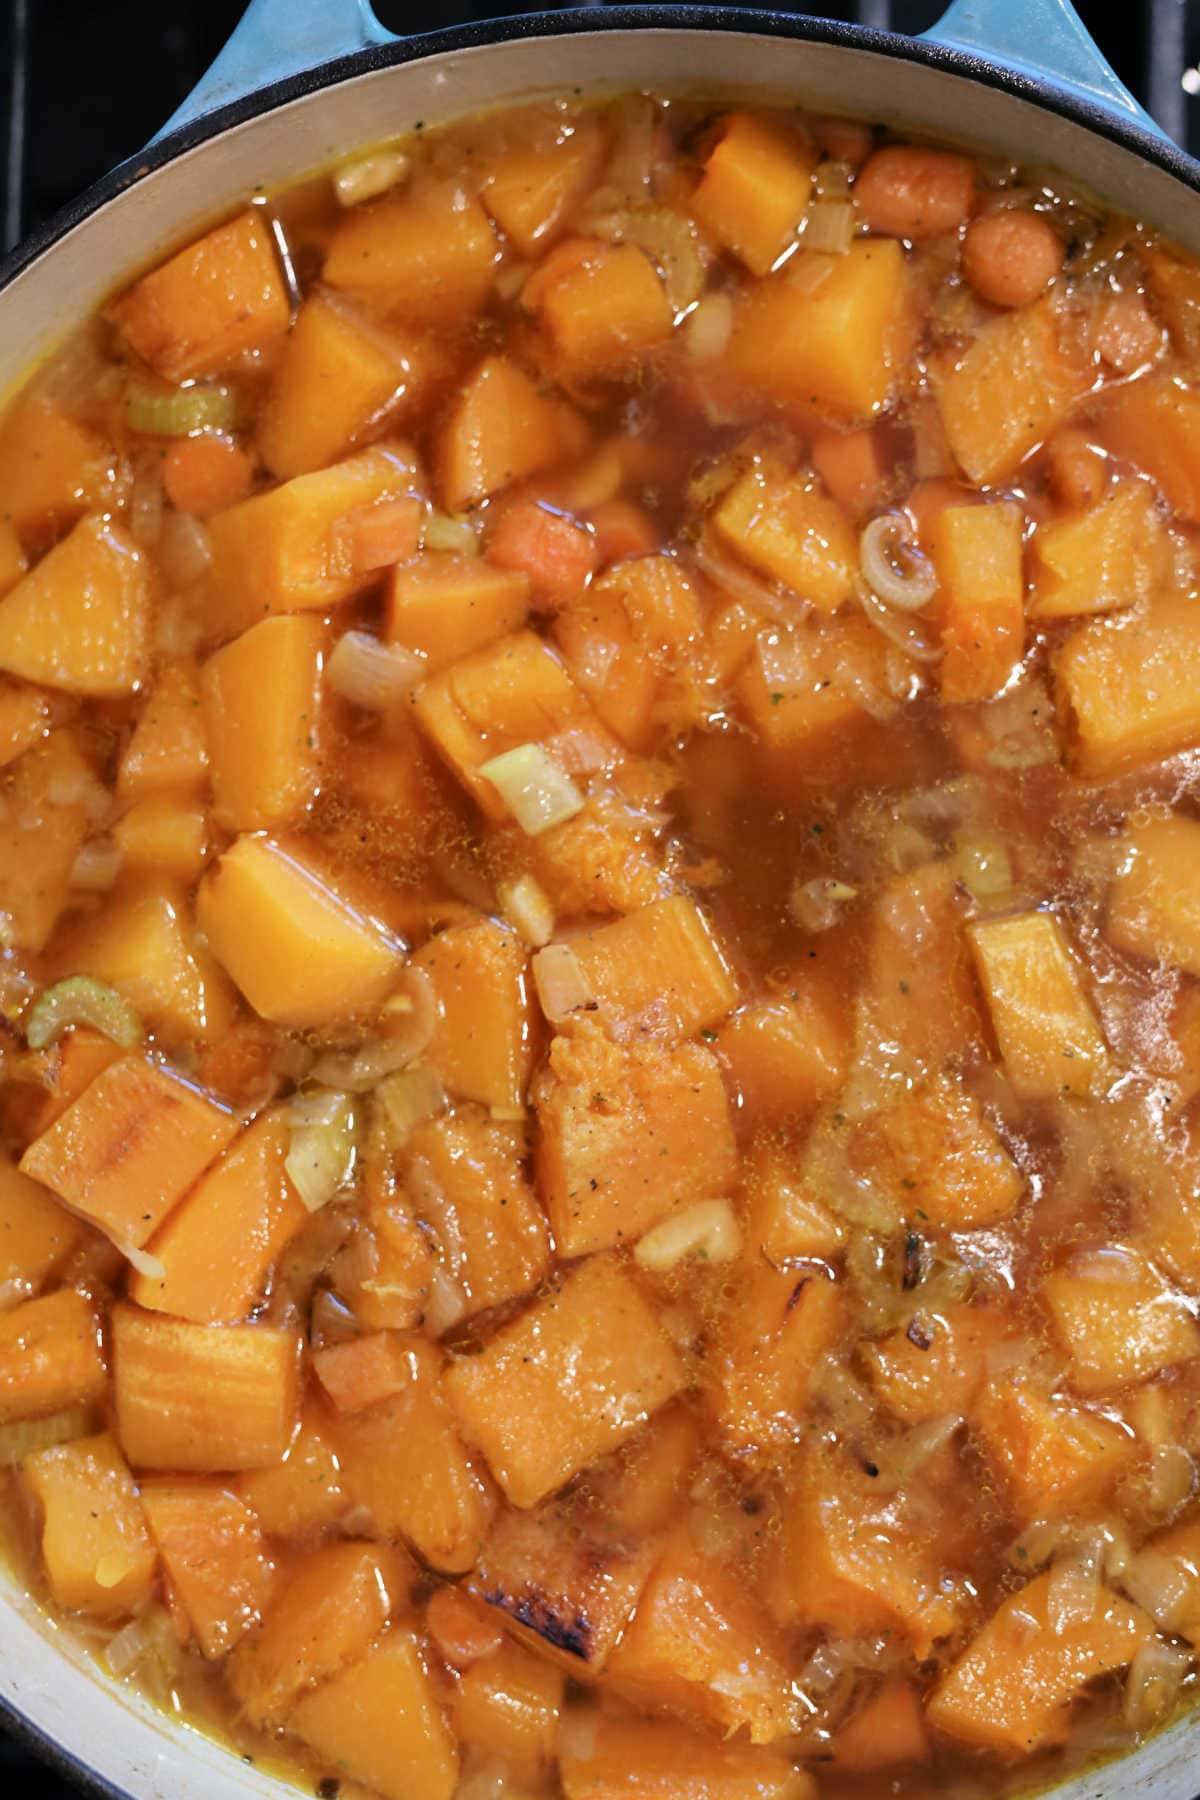 roasted butternut squash and apples in a pot with broth